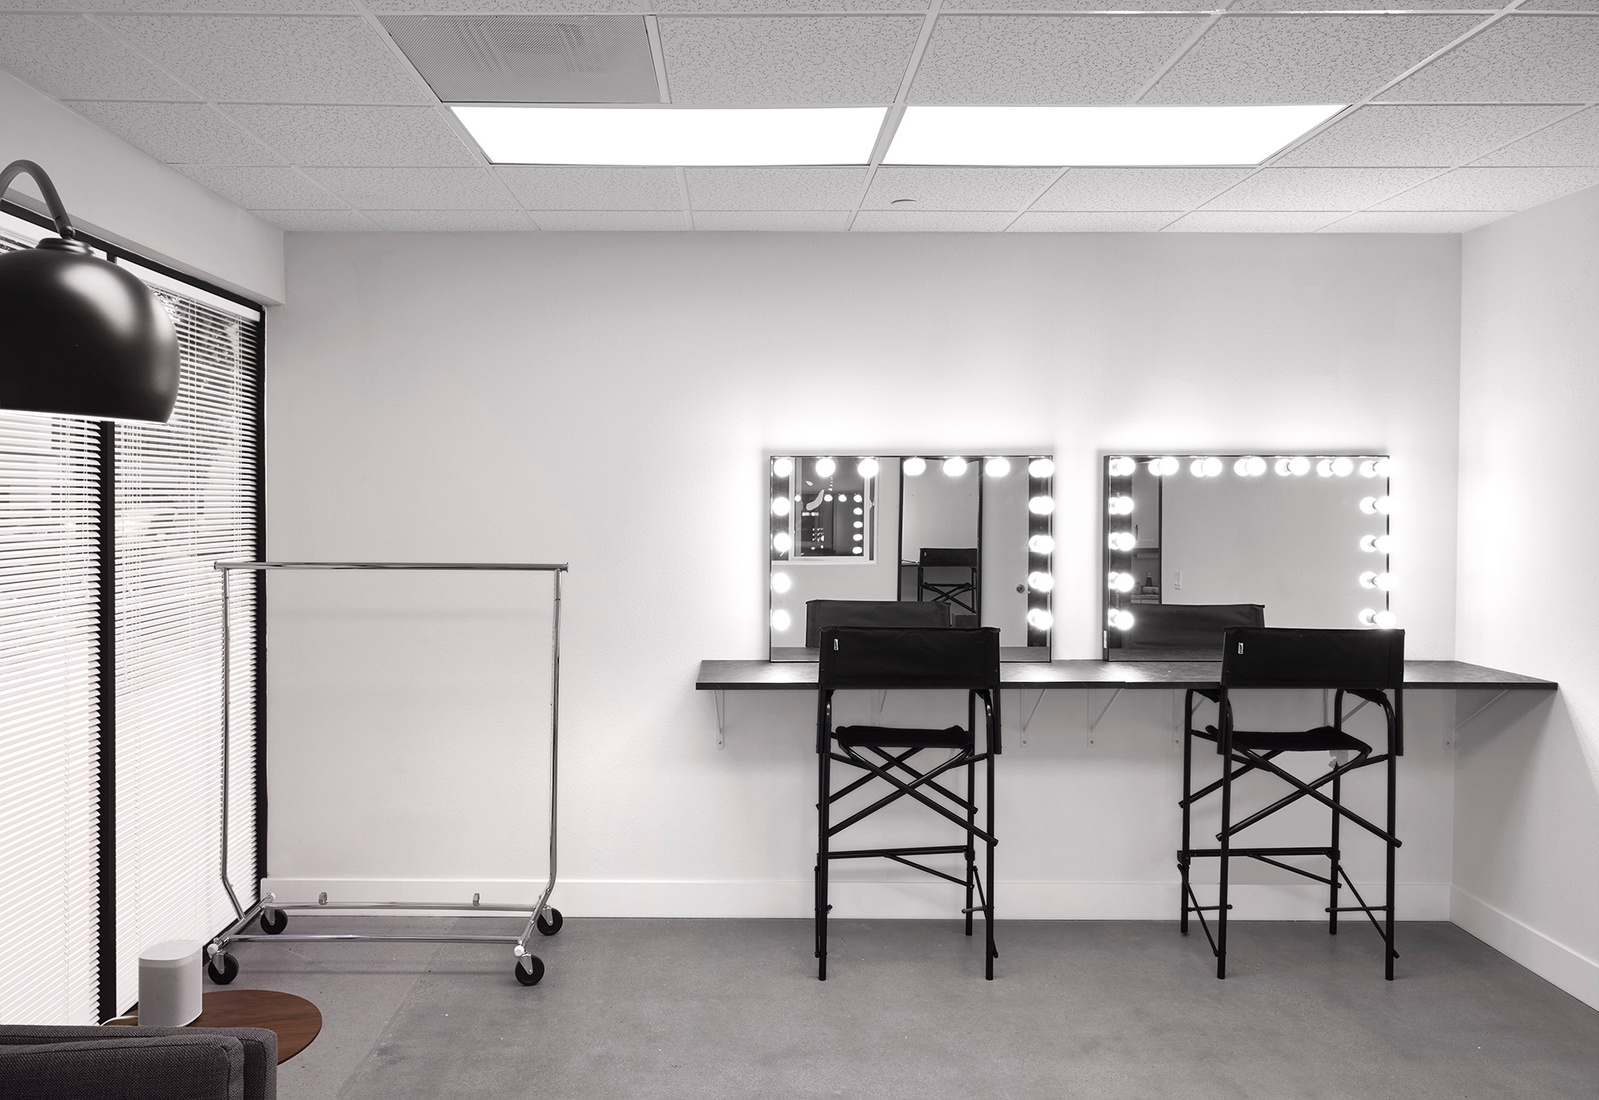 Los Angeles professional and affordable photo studio for photography and video production. Fully loaded with high-quality equipment: Broncolor, Aputure, Grip, and Digital equipment. Make up room
